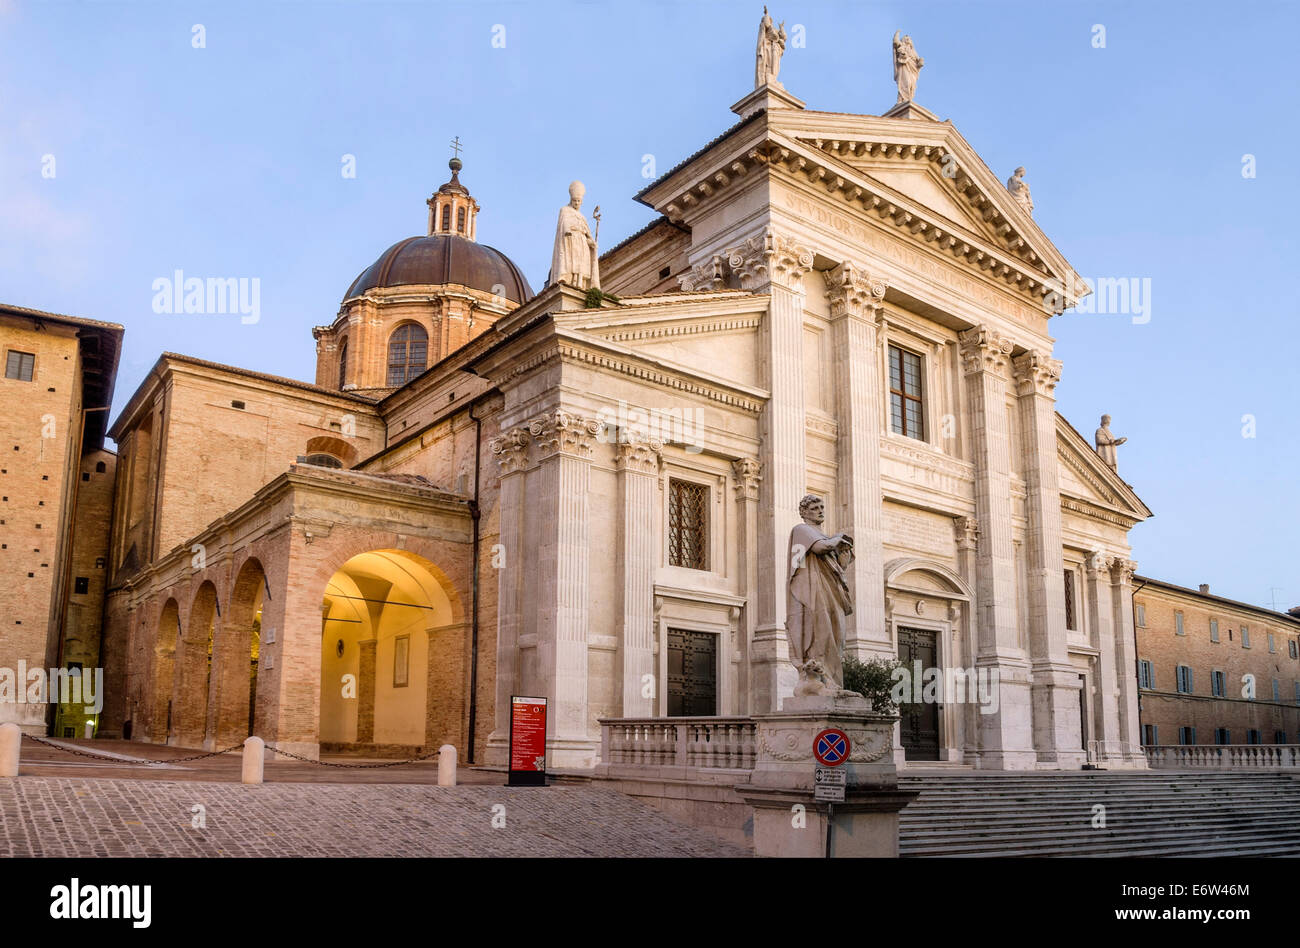 Duomo of Urbino (cathedral), Marche, Italy, founded in 1021 over a 6th century religious edifice. Stock Photo